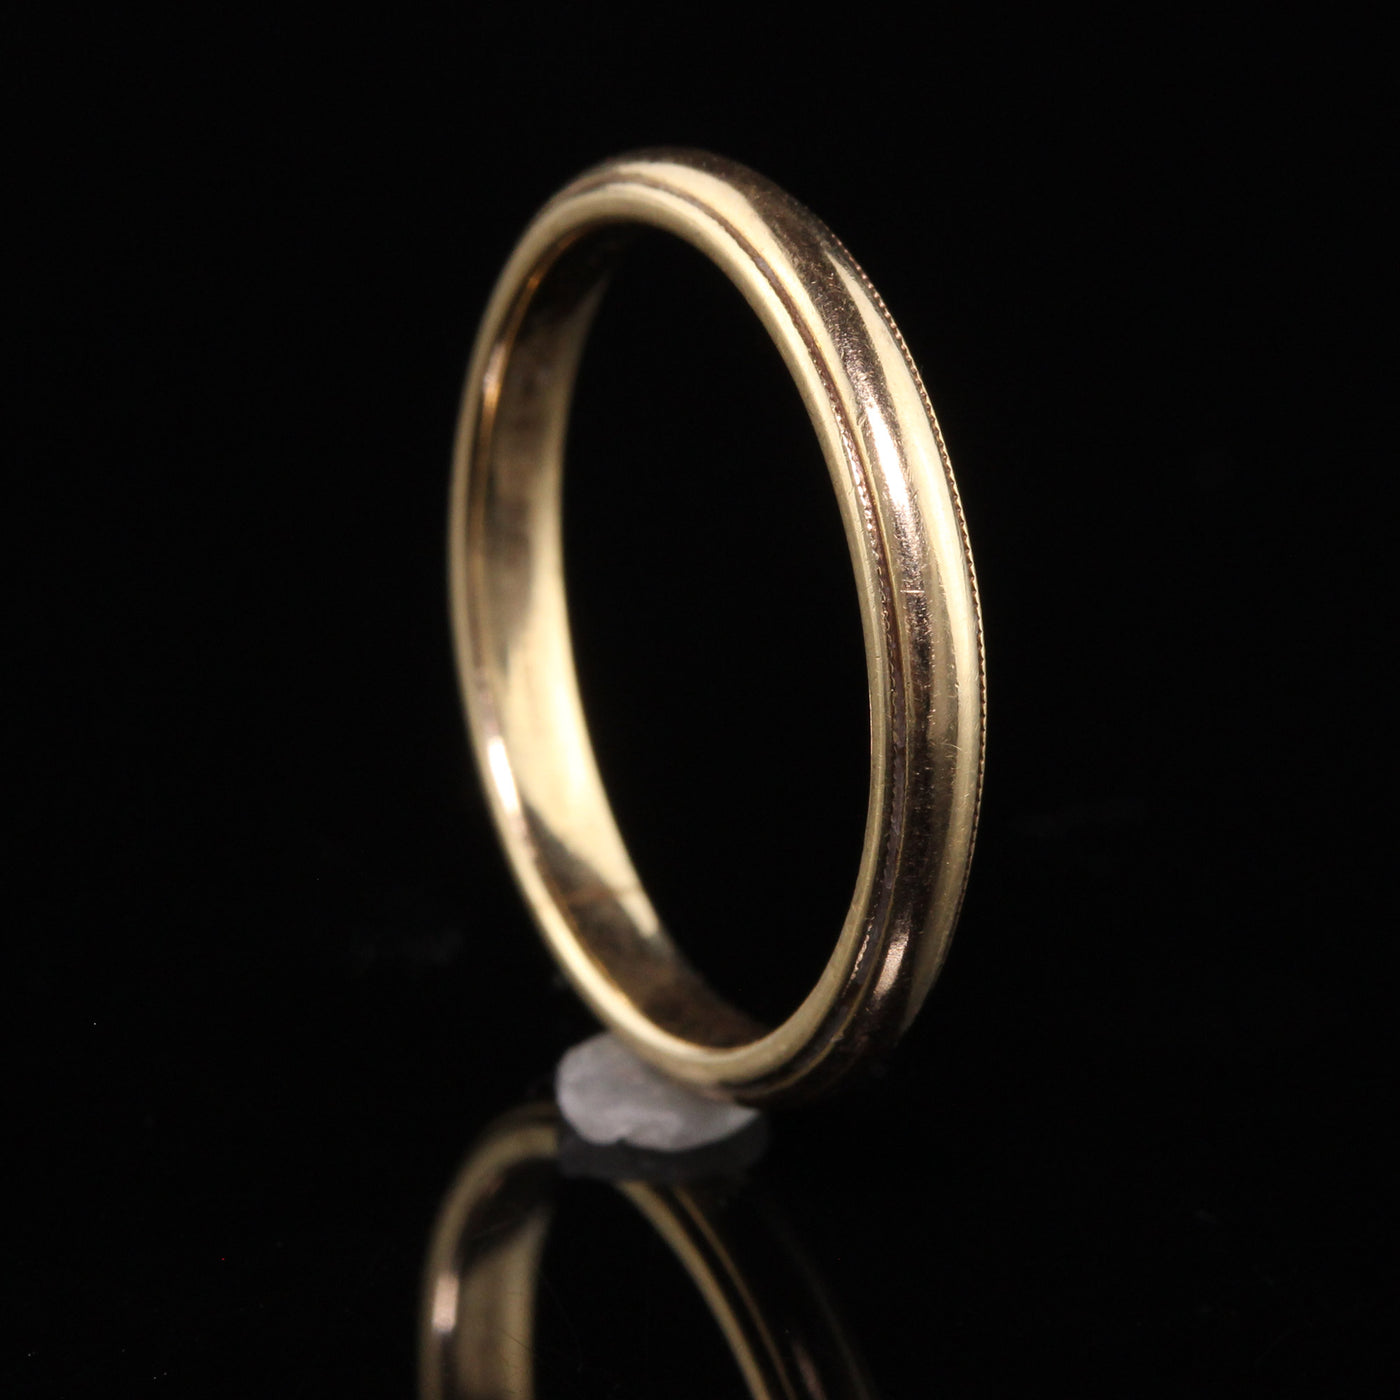 Antique Art Deco 14K Yellow Gold Classic Engraved Wedding Band